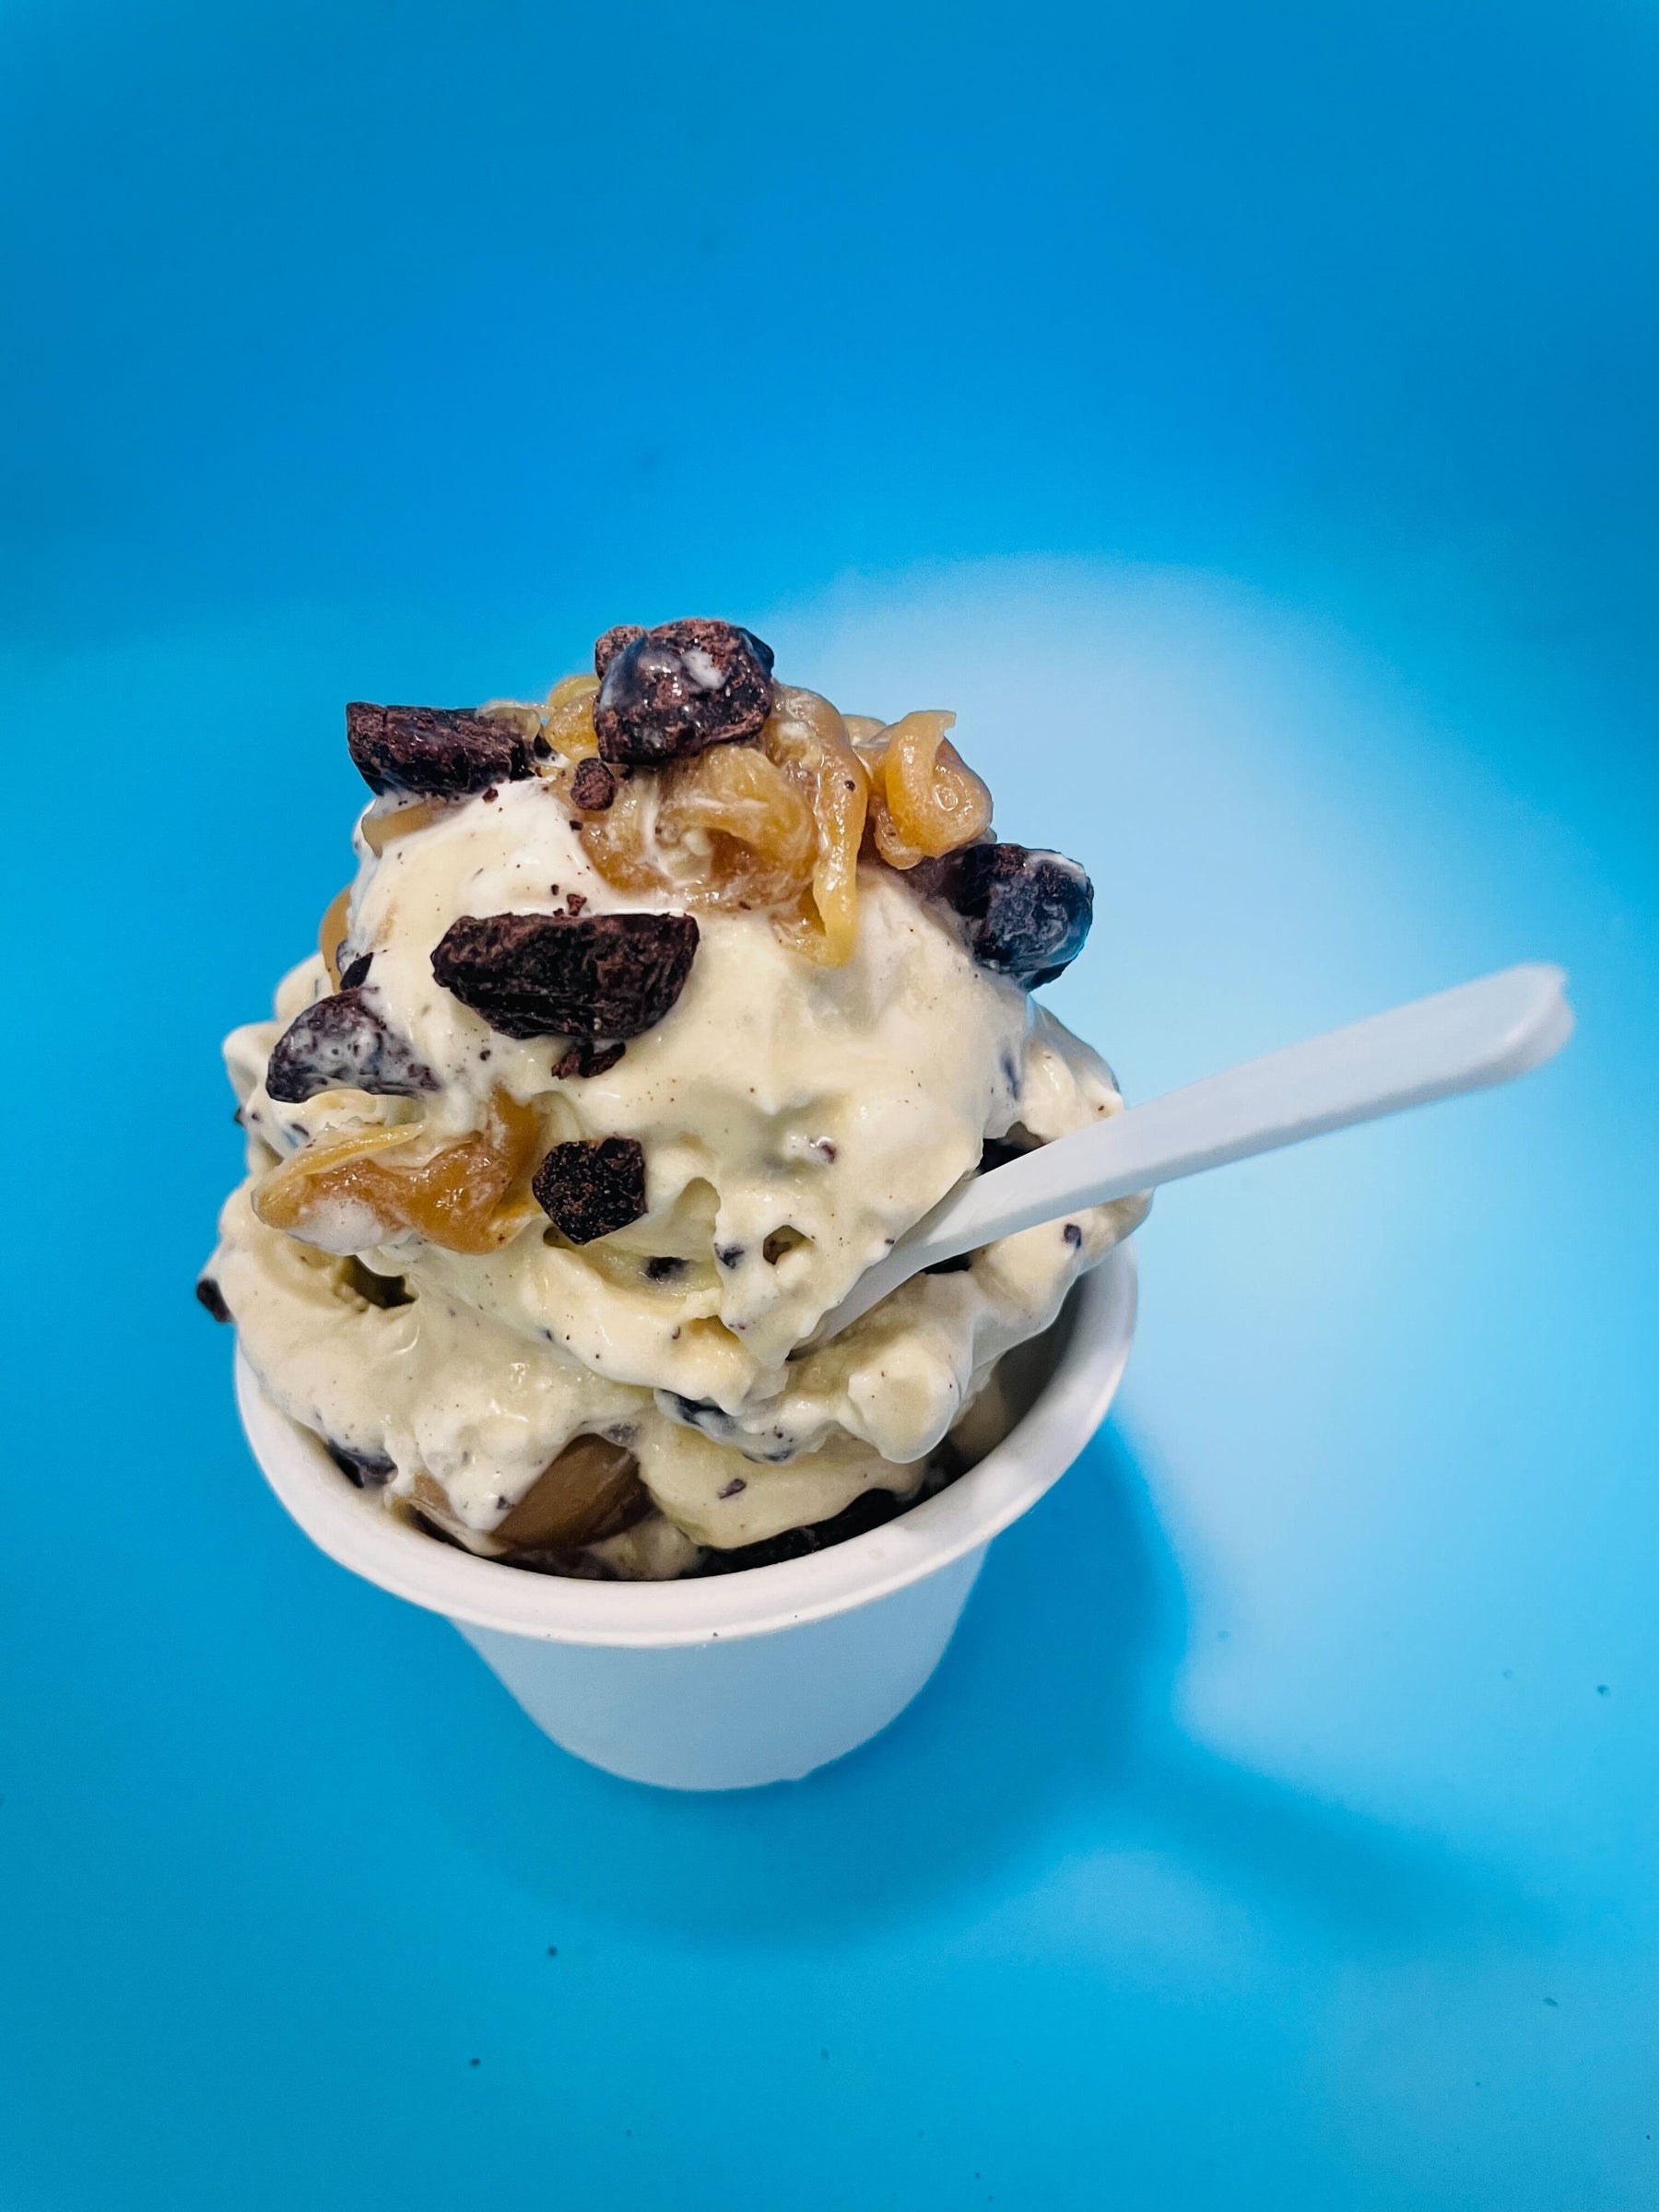 Try a Smog City Infused Frozen Treat for FREE today only, with Caramel and Chocolate Swirl!